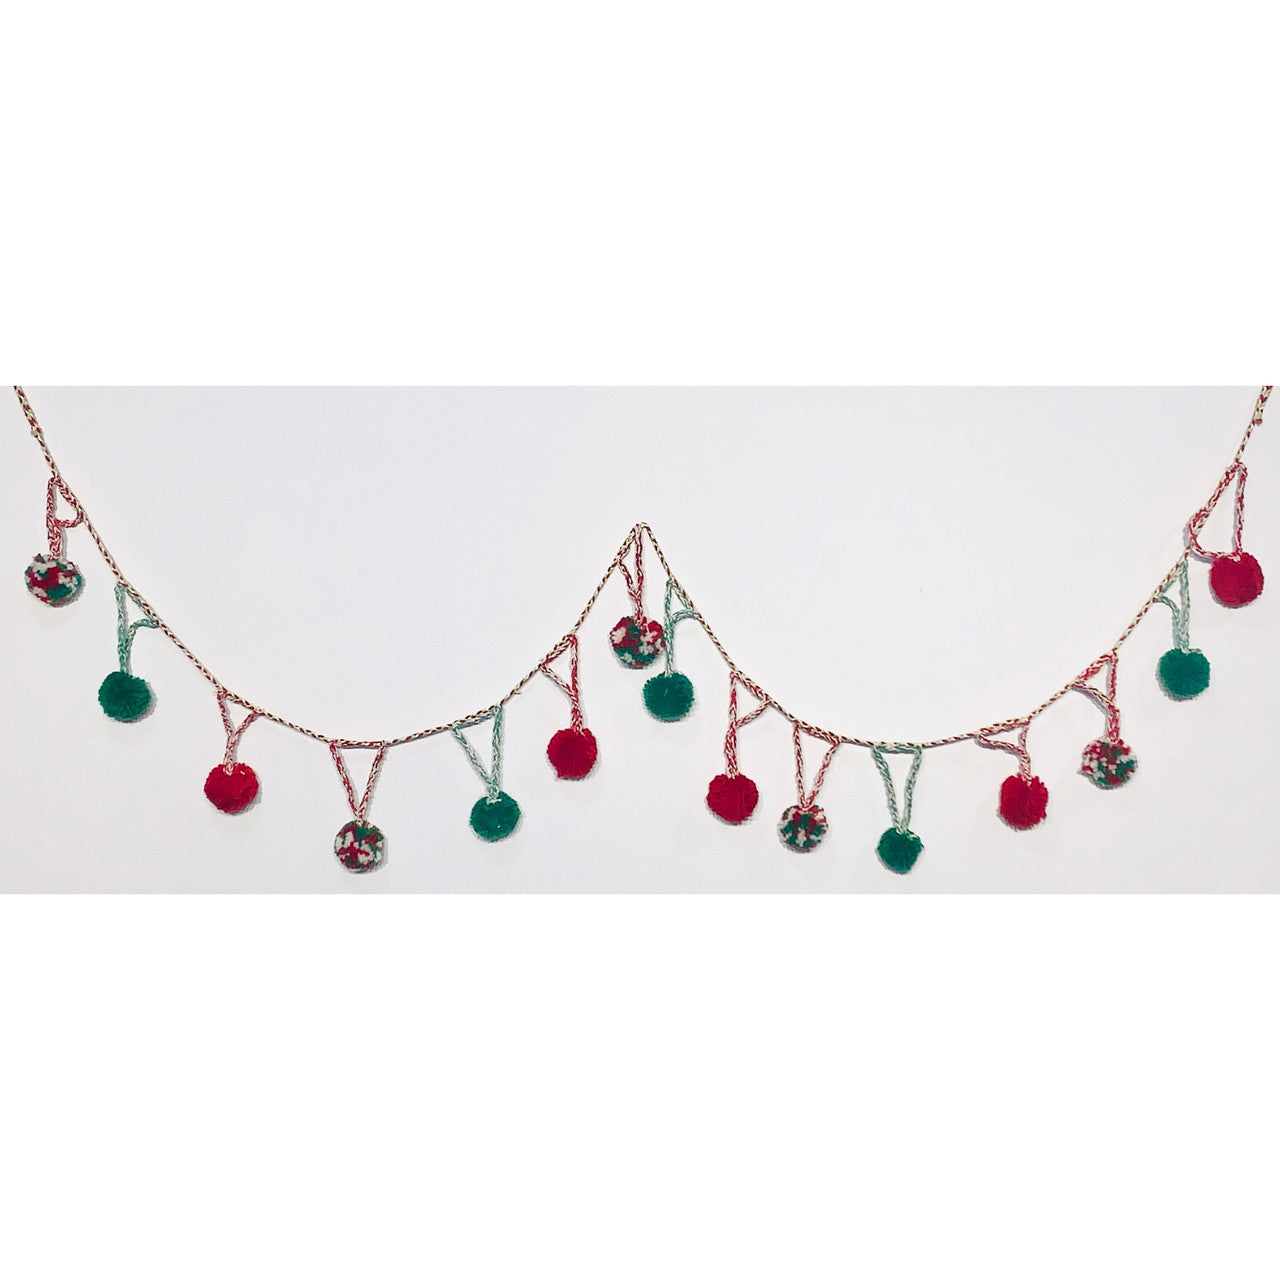 Wool Holiday Cream, Red and Green Garland